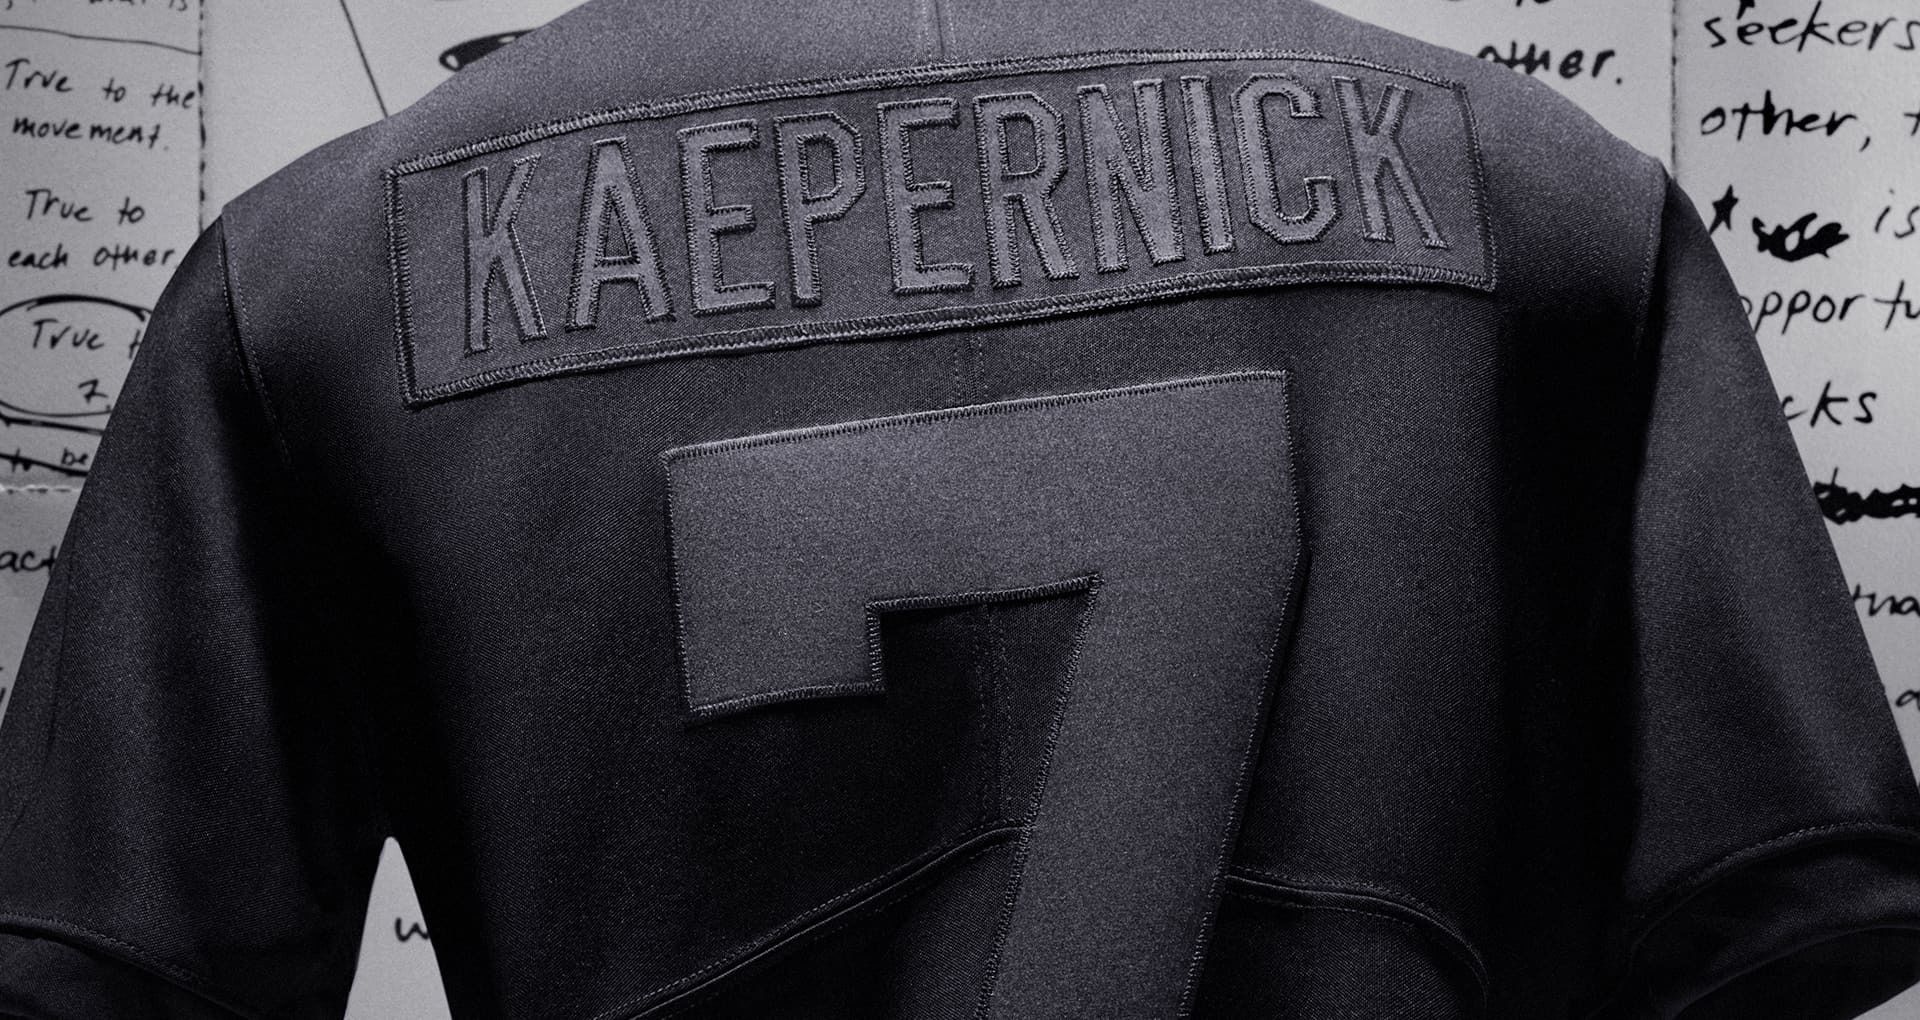 dedo índice Illinois Lírico Nike's all-black Colin Kaepernick jersey marking 4 years since he took a  knee sells out in less than a minute | CNN